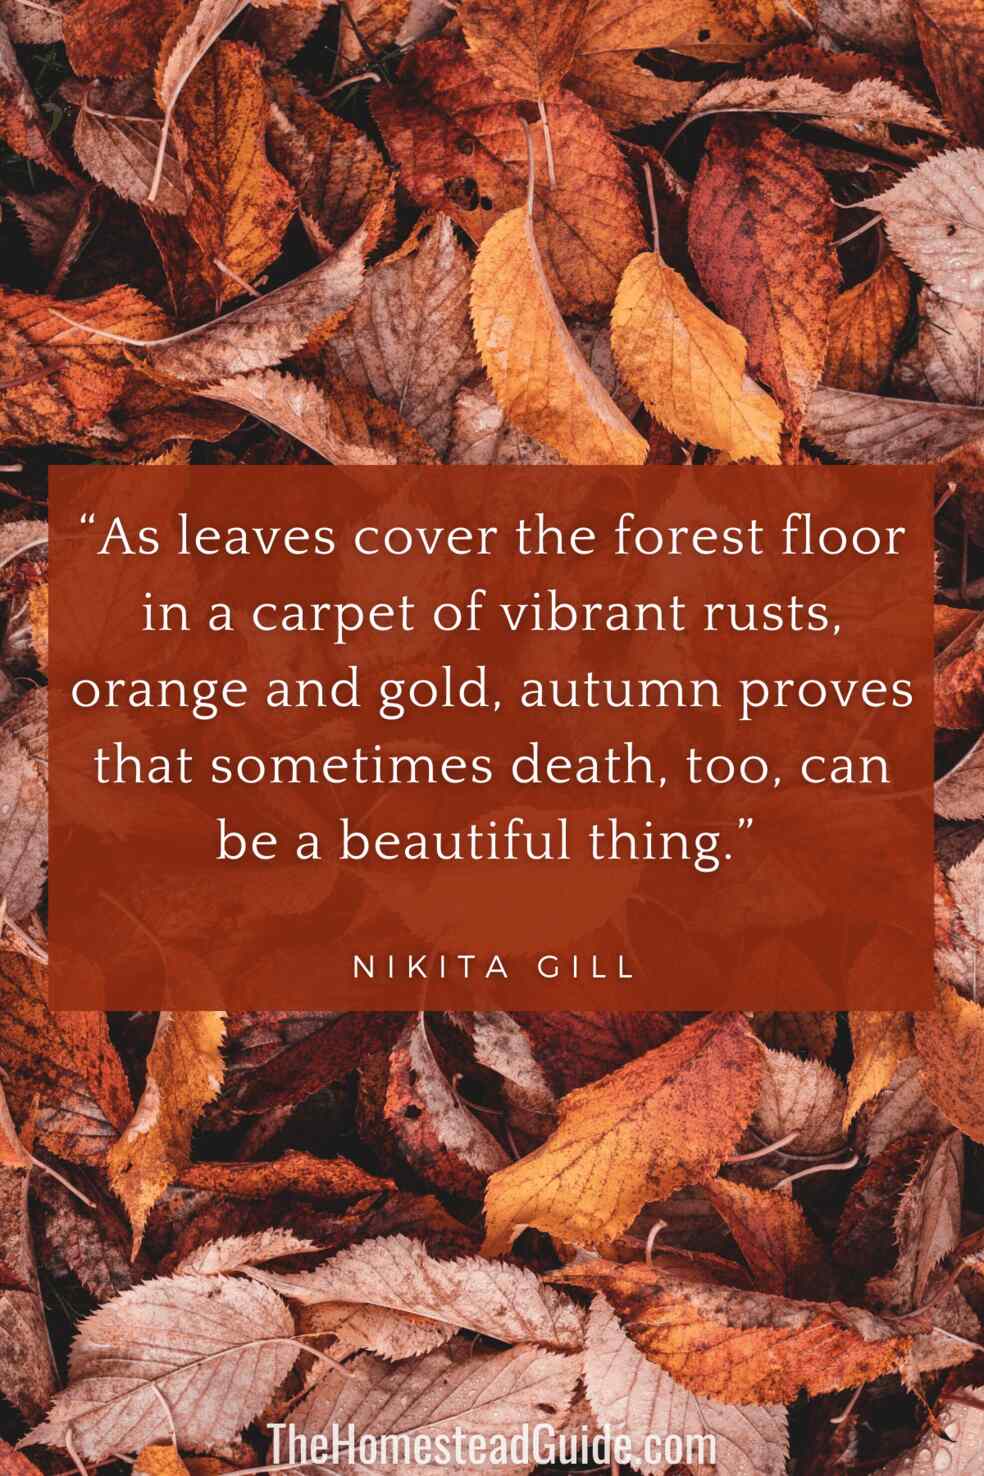 As leaves cover the forest floor in a carpet of vibrant rusts, orange and gold, autumn proves that sometimes death, too, can be a beautiful thing.